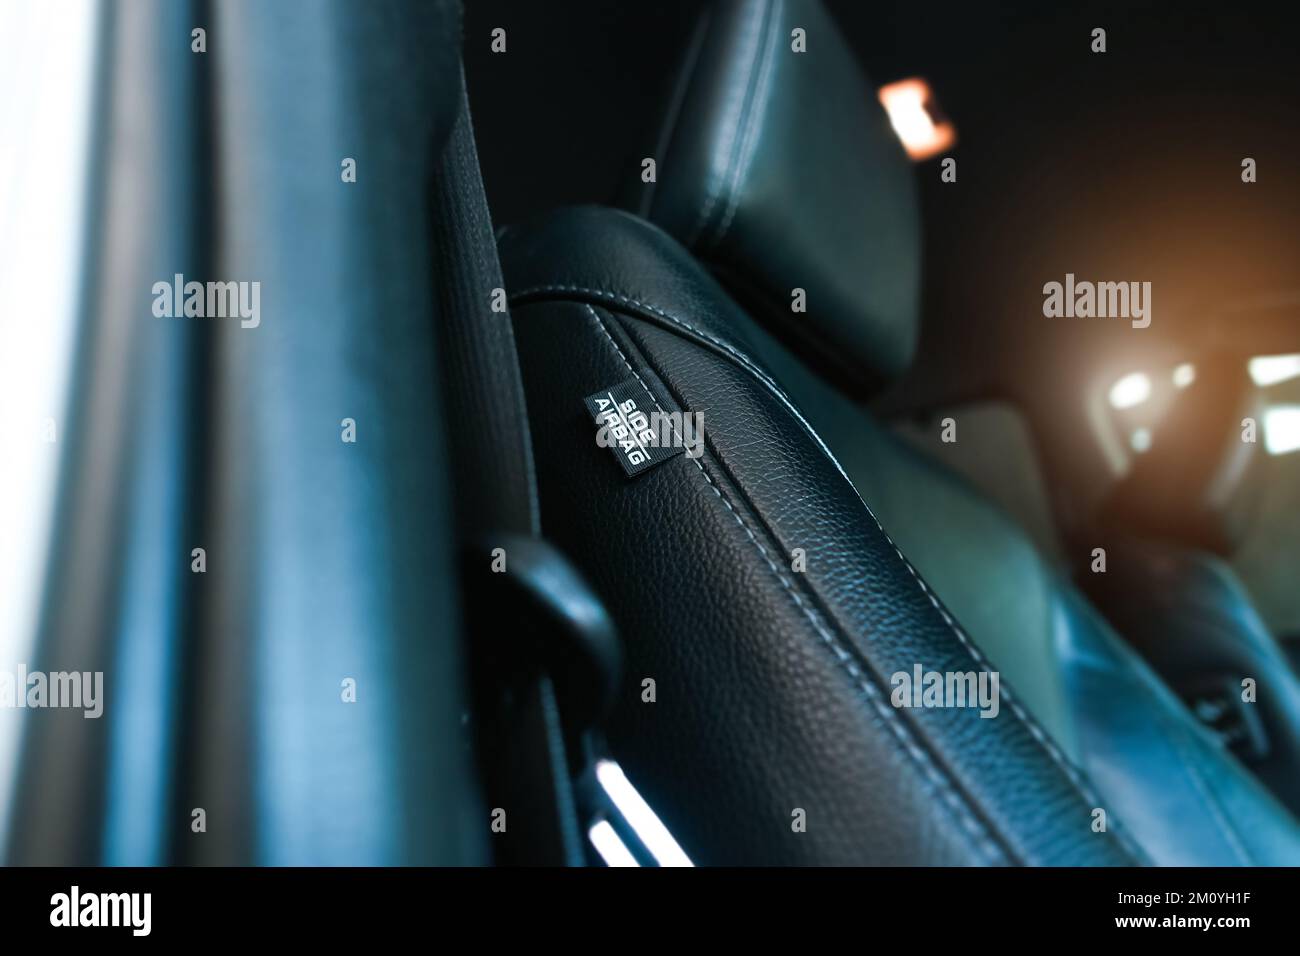 Airbag label on the side of the leather seat inside the car, Airbag system and car safety concept Stock Photo